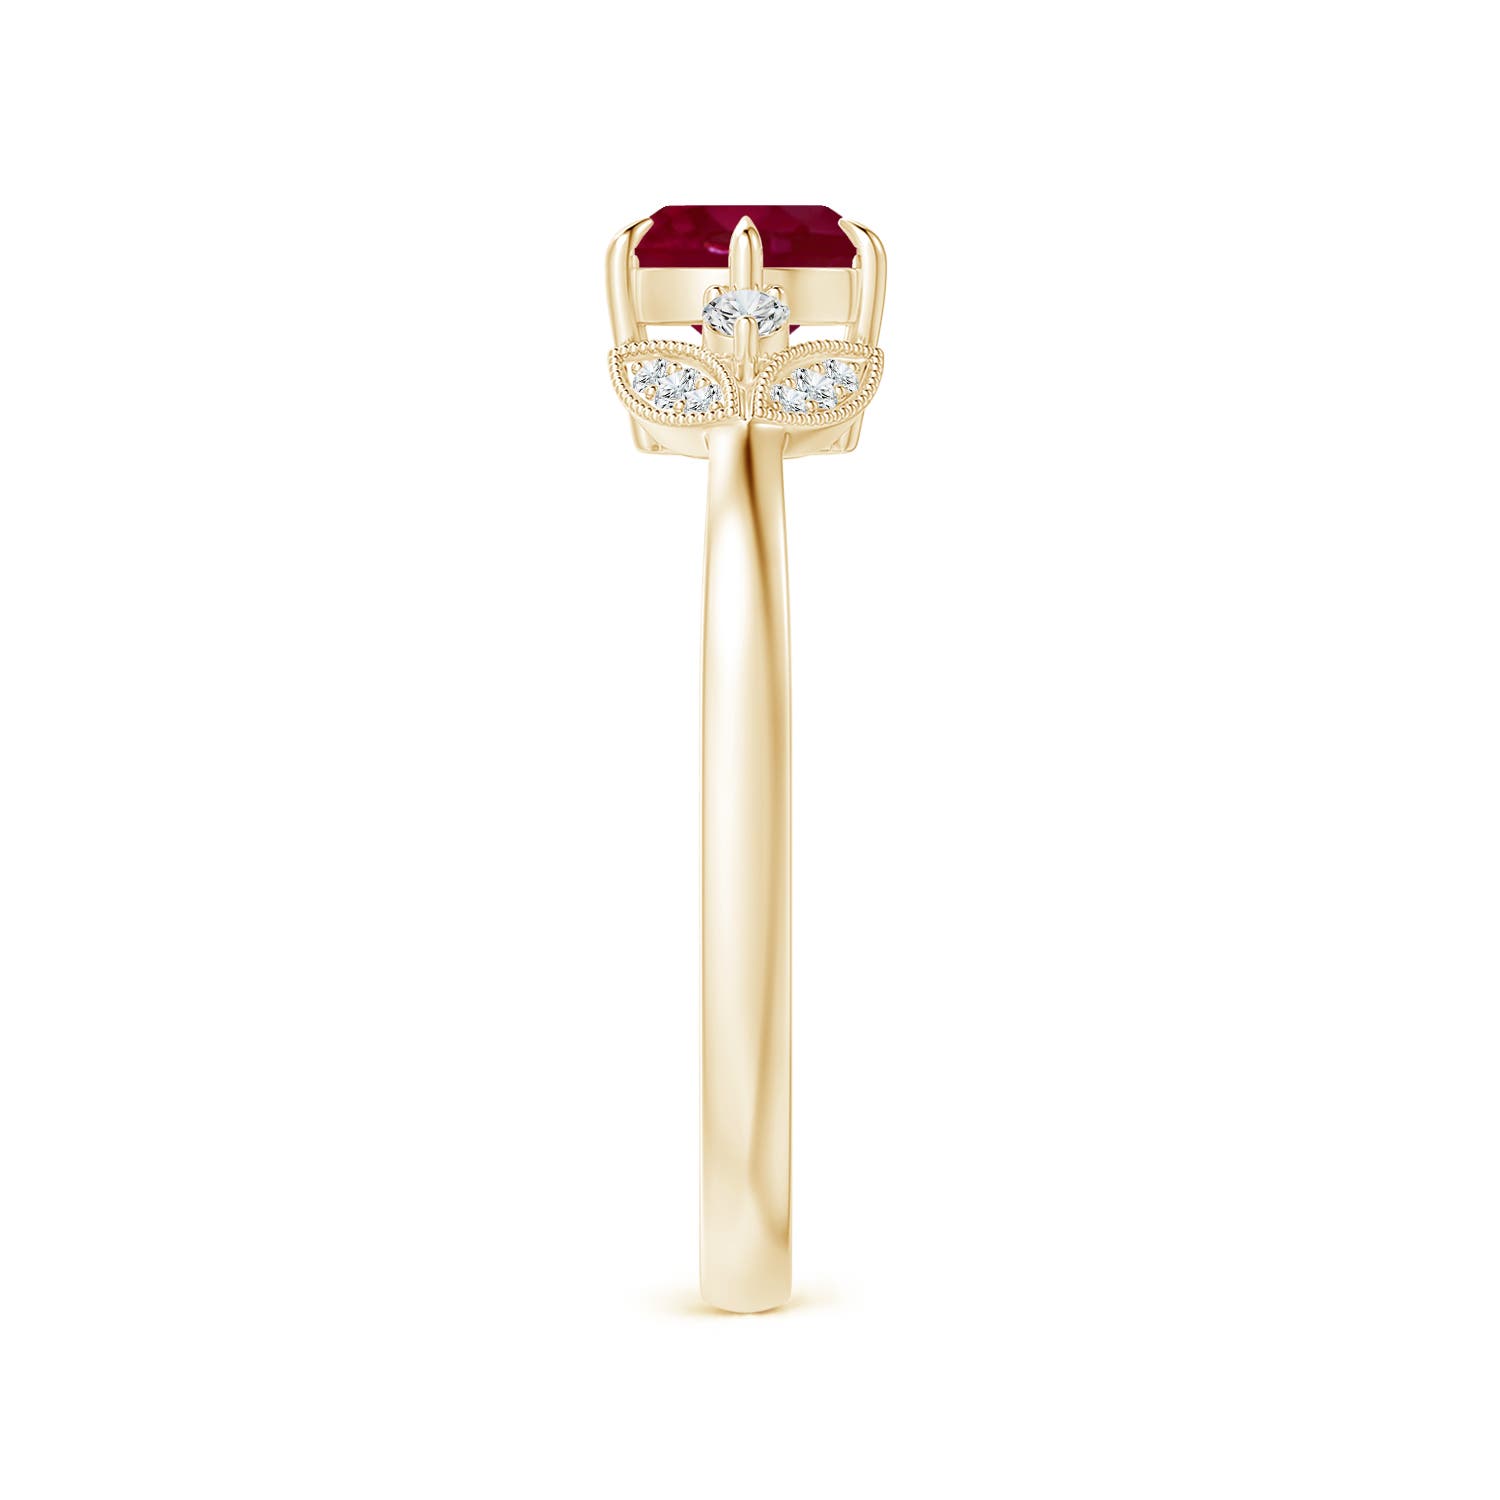 A - Ruby / 1.1 CT / 14 KT Yellow Gold